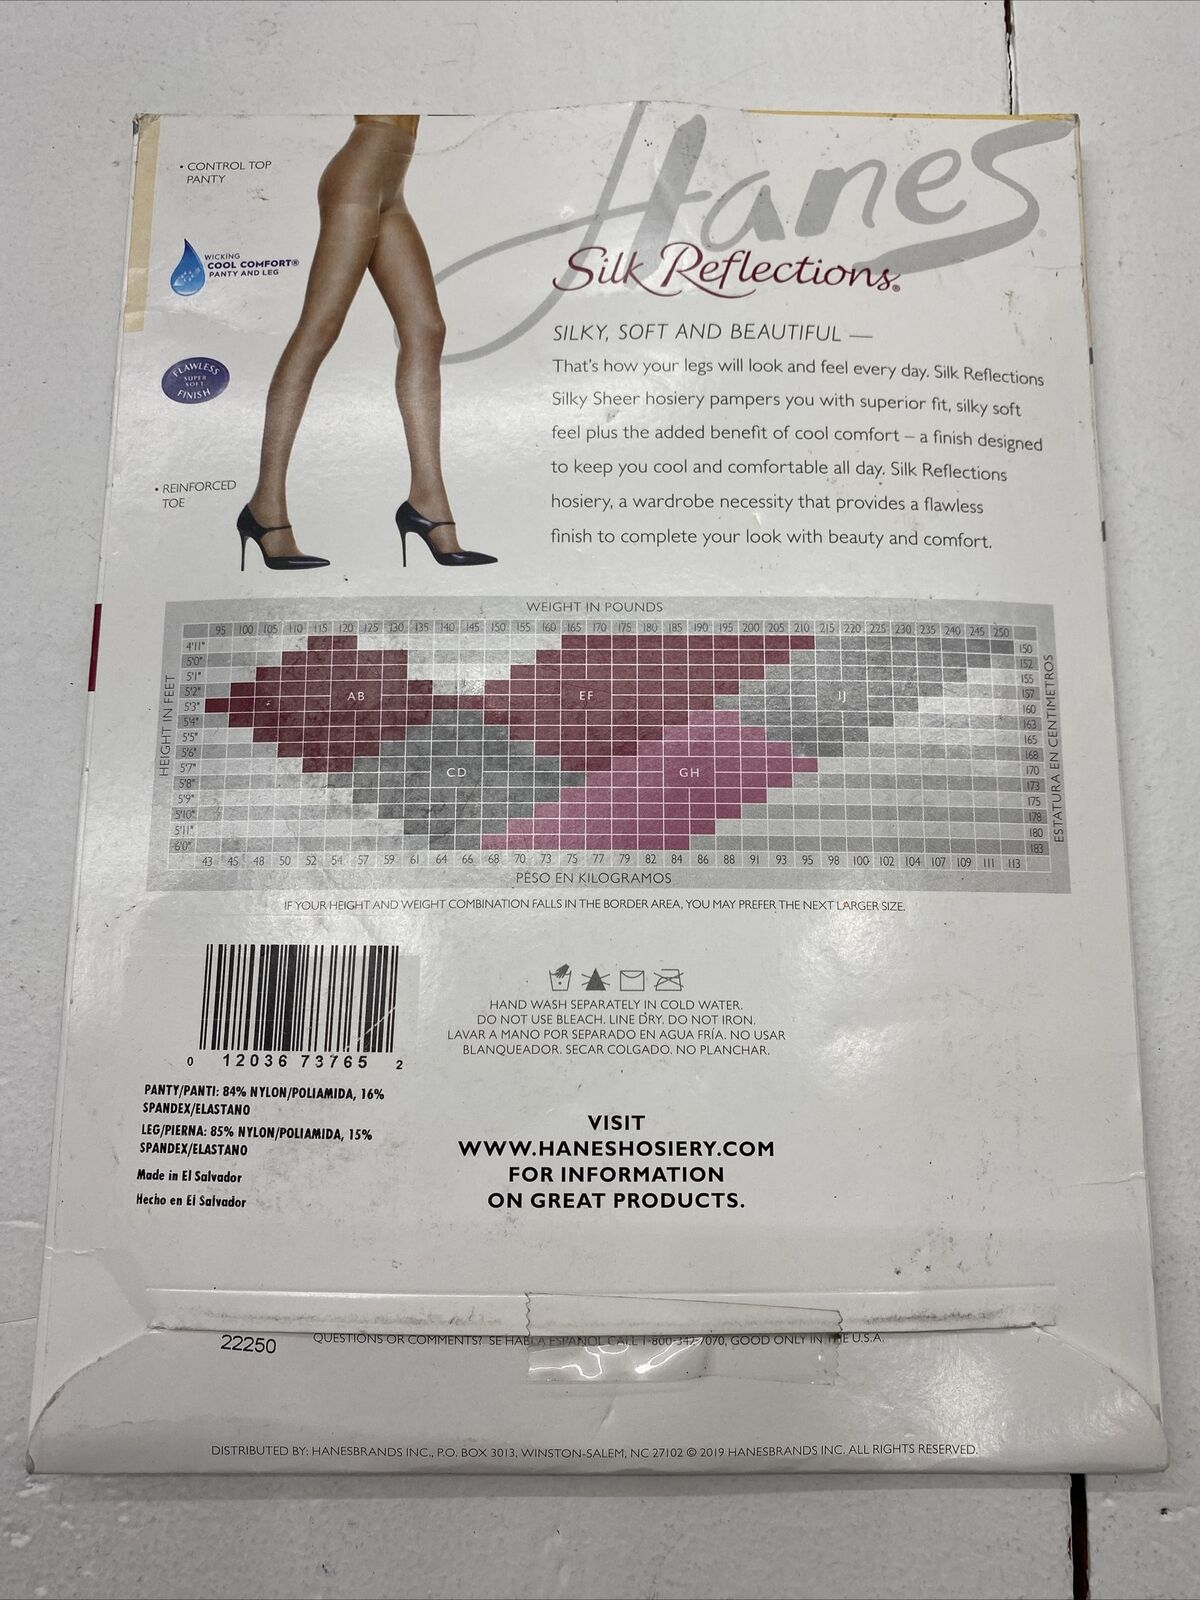 Silk Reflections Control Top Reinforced Toe Pantyhose Q00718 Size AB N -  beyond exchange